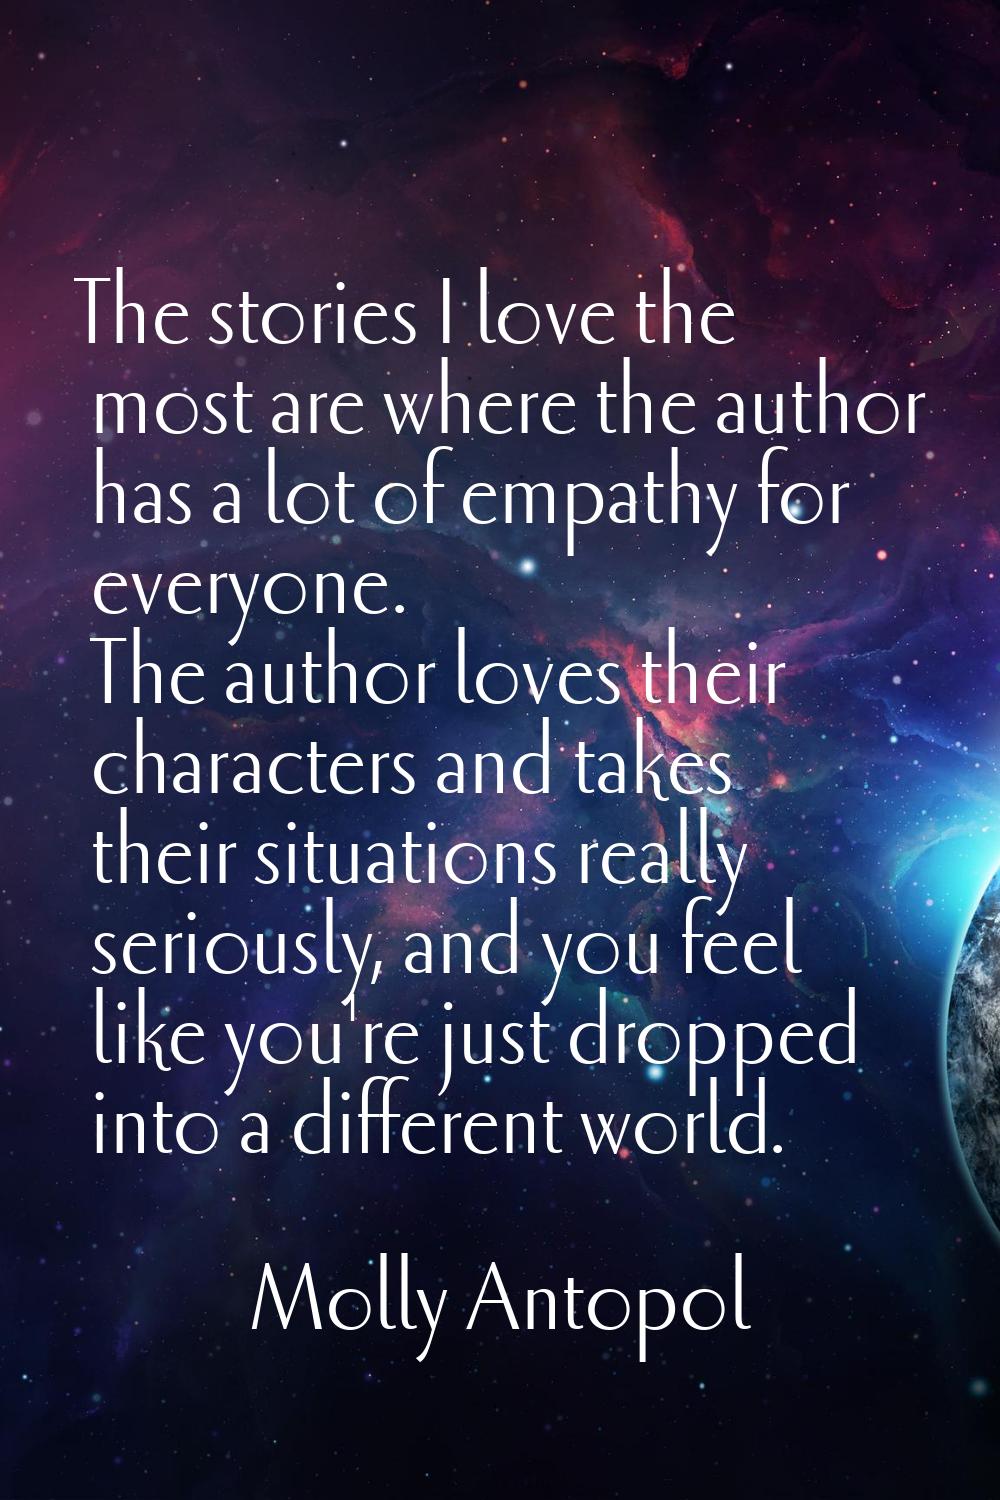 The stories I love the most are where the author has a lot of empathy for everyone. The author love